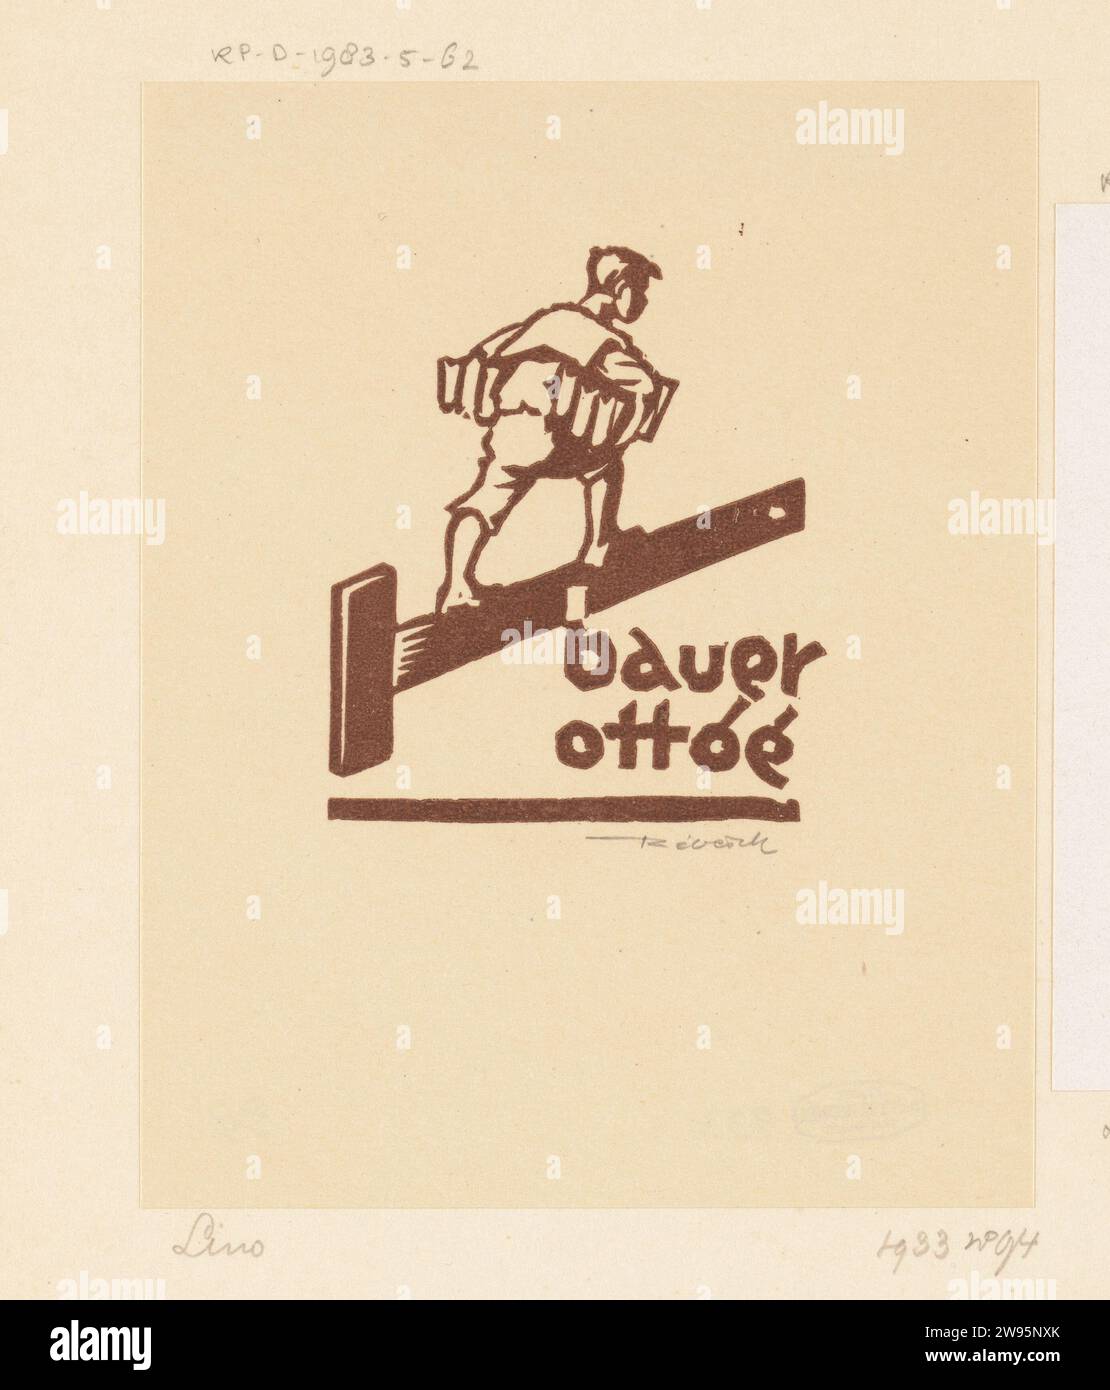 Ex Libris is Otto Bauer, Kornél Révész, 1933  Ex Libris is part of cover with 64 ex Libris on 34 separate set -up sheets, a catalog and a text sheet. Budapest paper  book. measuring-instruments. boy (child between toddler and youth) Stock Photo